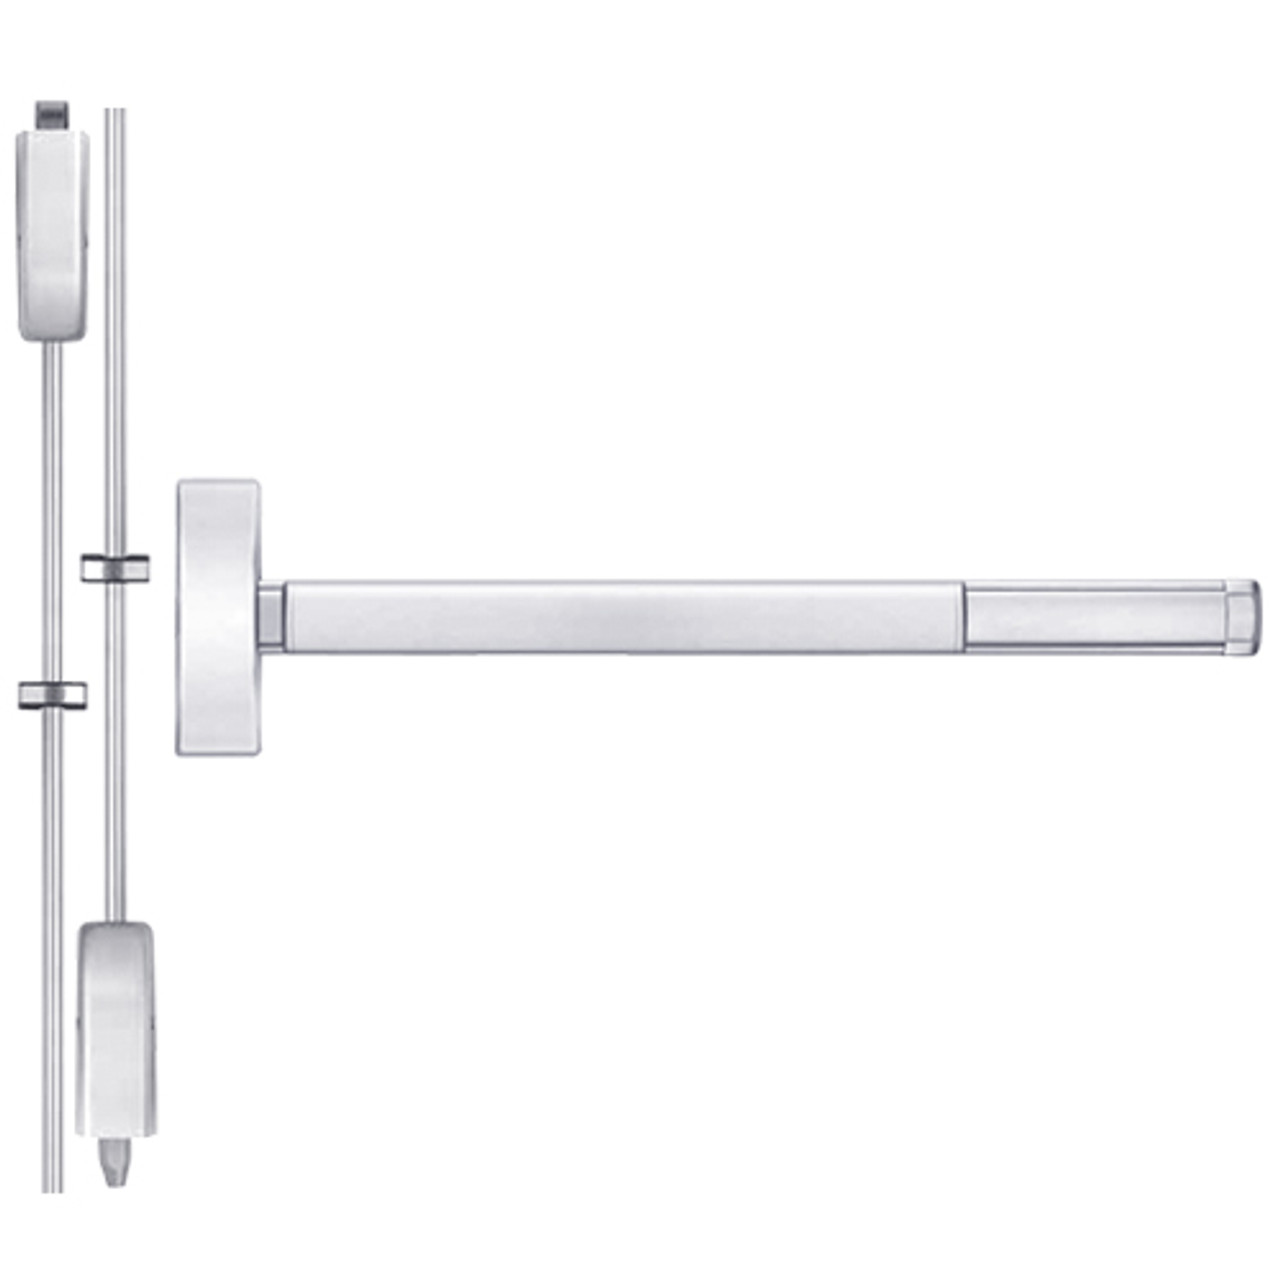 DEFL2215LBR-625-36 PHI 2200 Series Fire Rated Apex Surface Vertical Rod Device with Delayed Egress Prepped for Thumb Piece Always Active in Bright Chrome Finish